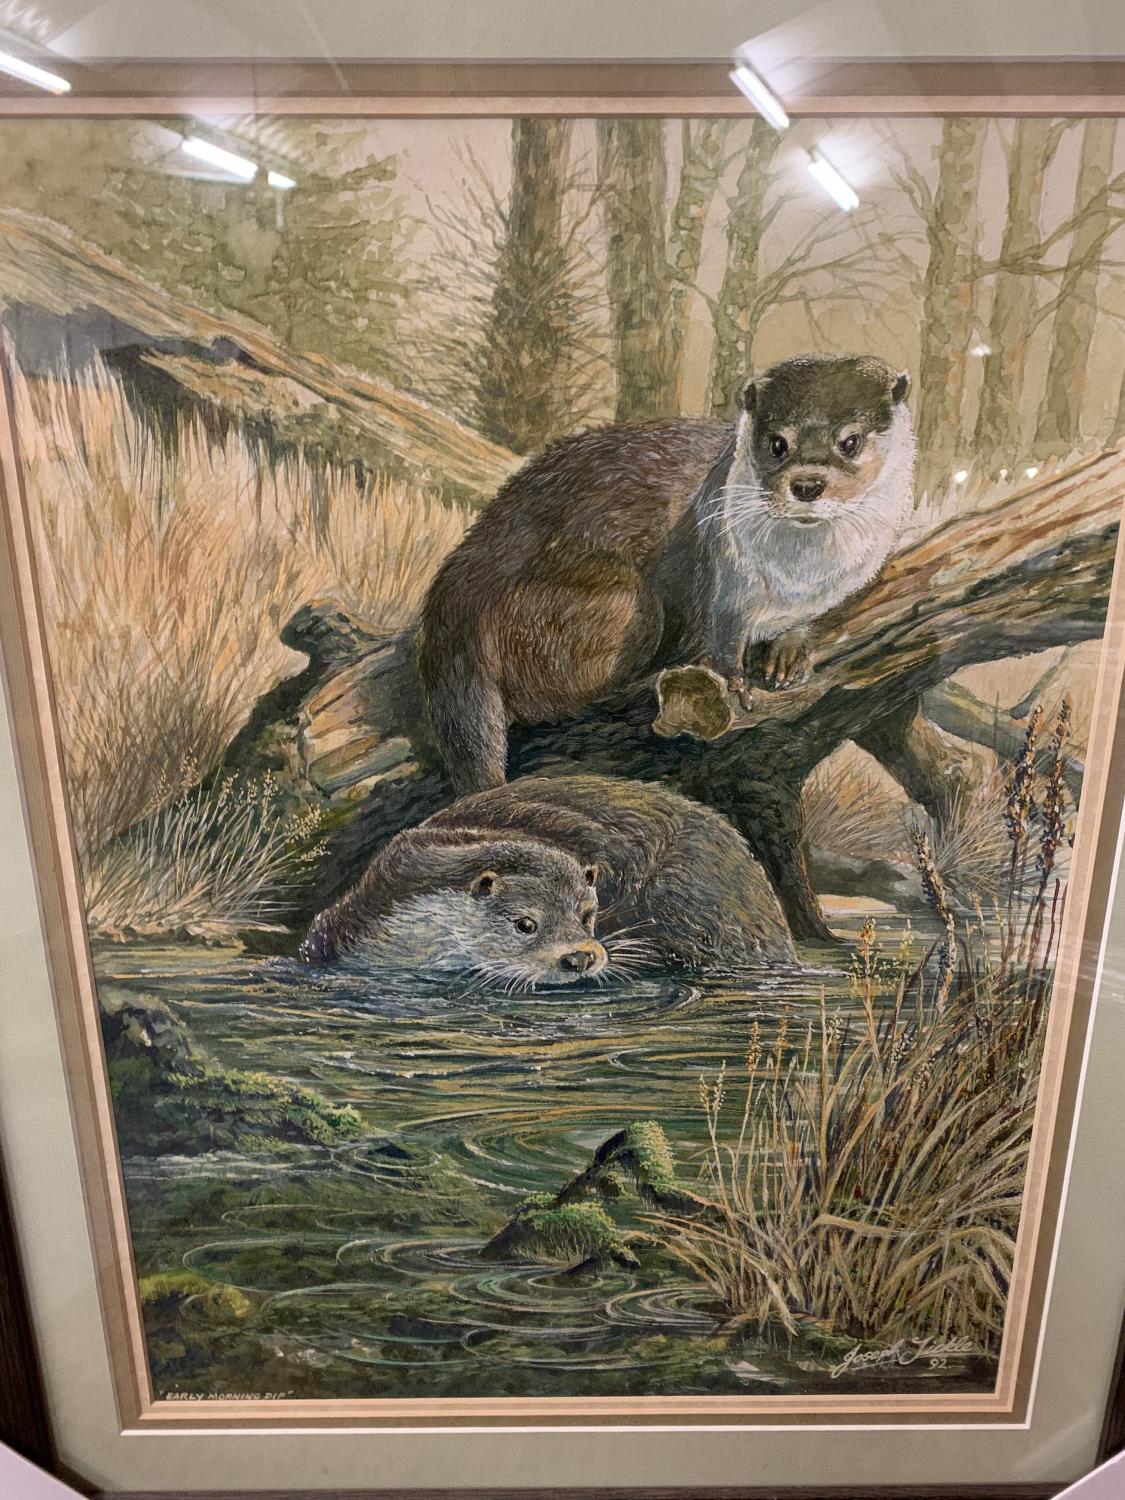 A JOSEPH TICKLE ORIGINAL FRAMED OTTER PAINTING 'EARLY MORNING DIP' WHOLESALE PRICE £200 - Image 2 of 4